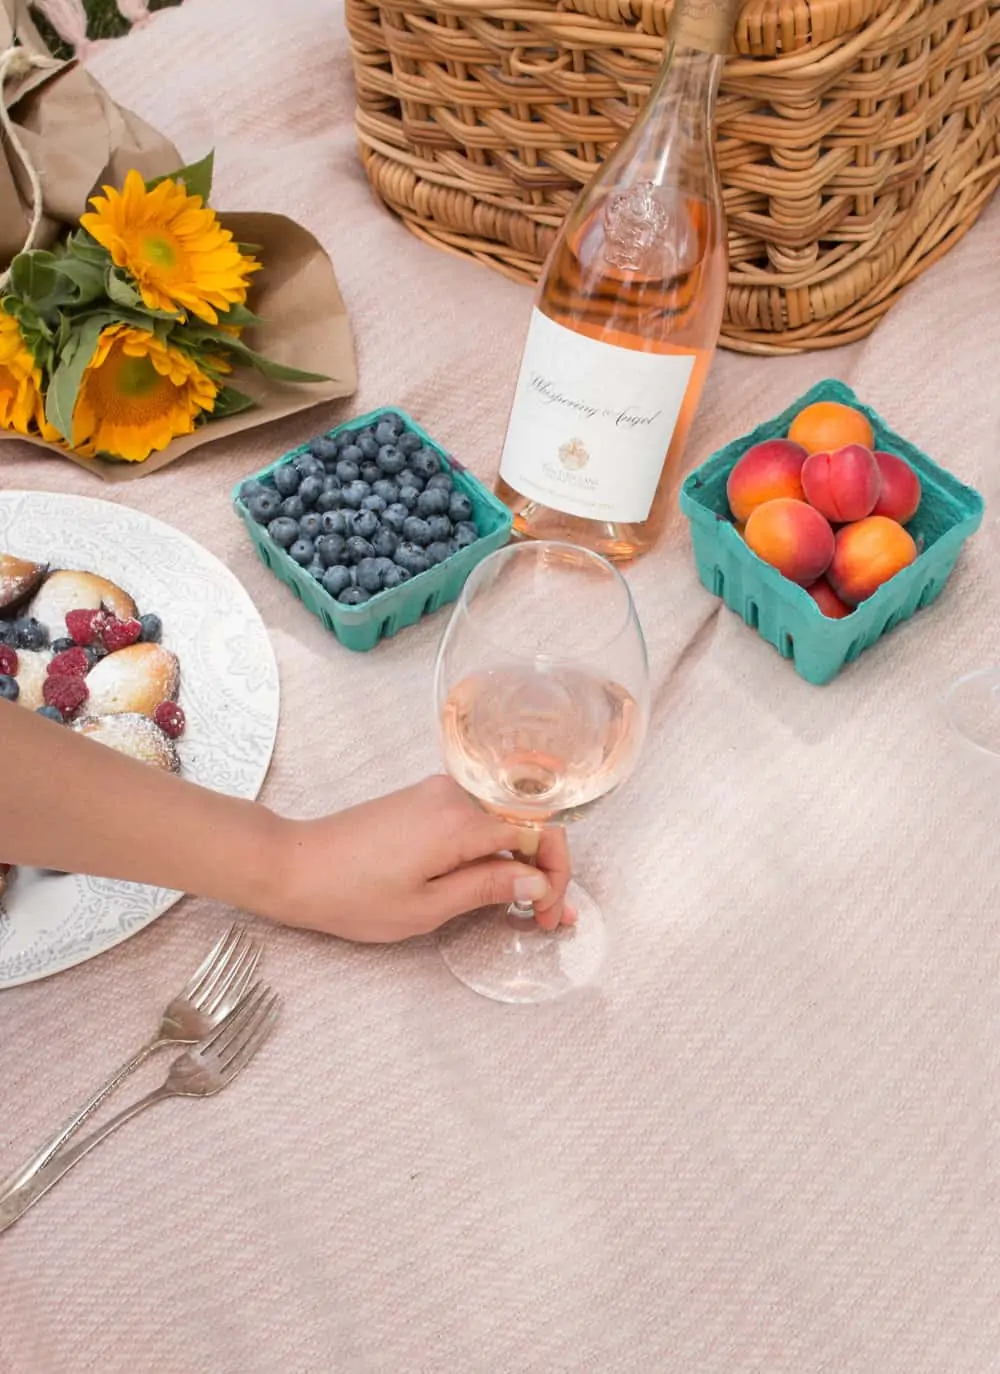 picnic setup with sunflower, fruits and wine for how to host a parisian picnic